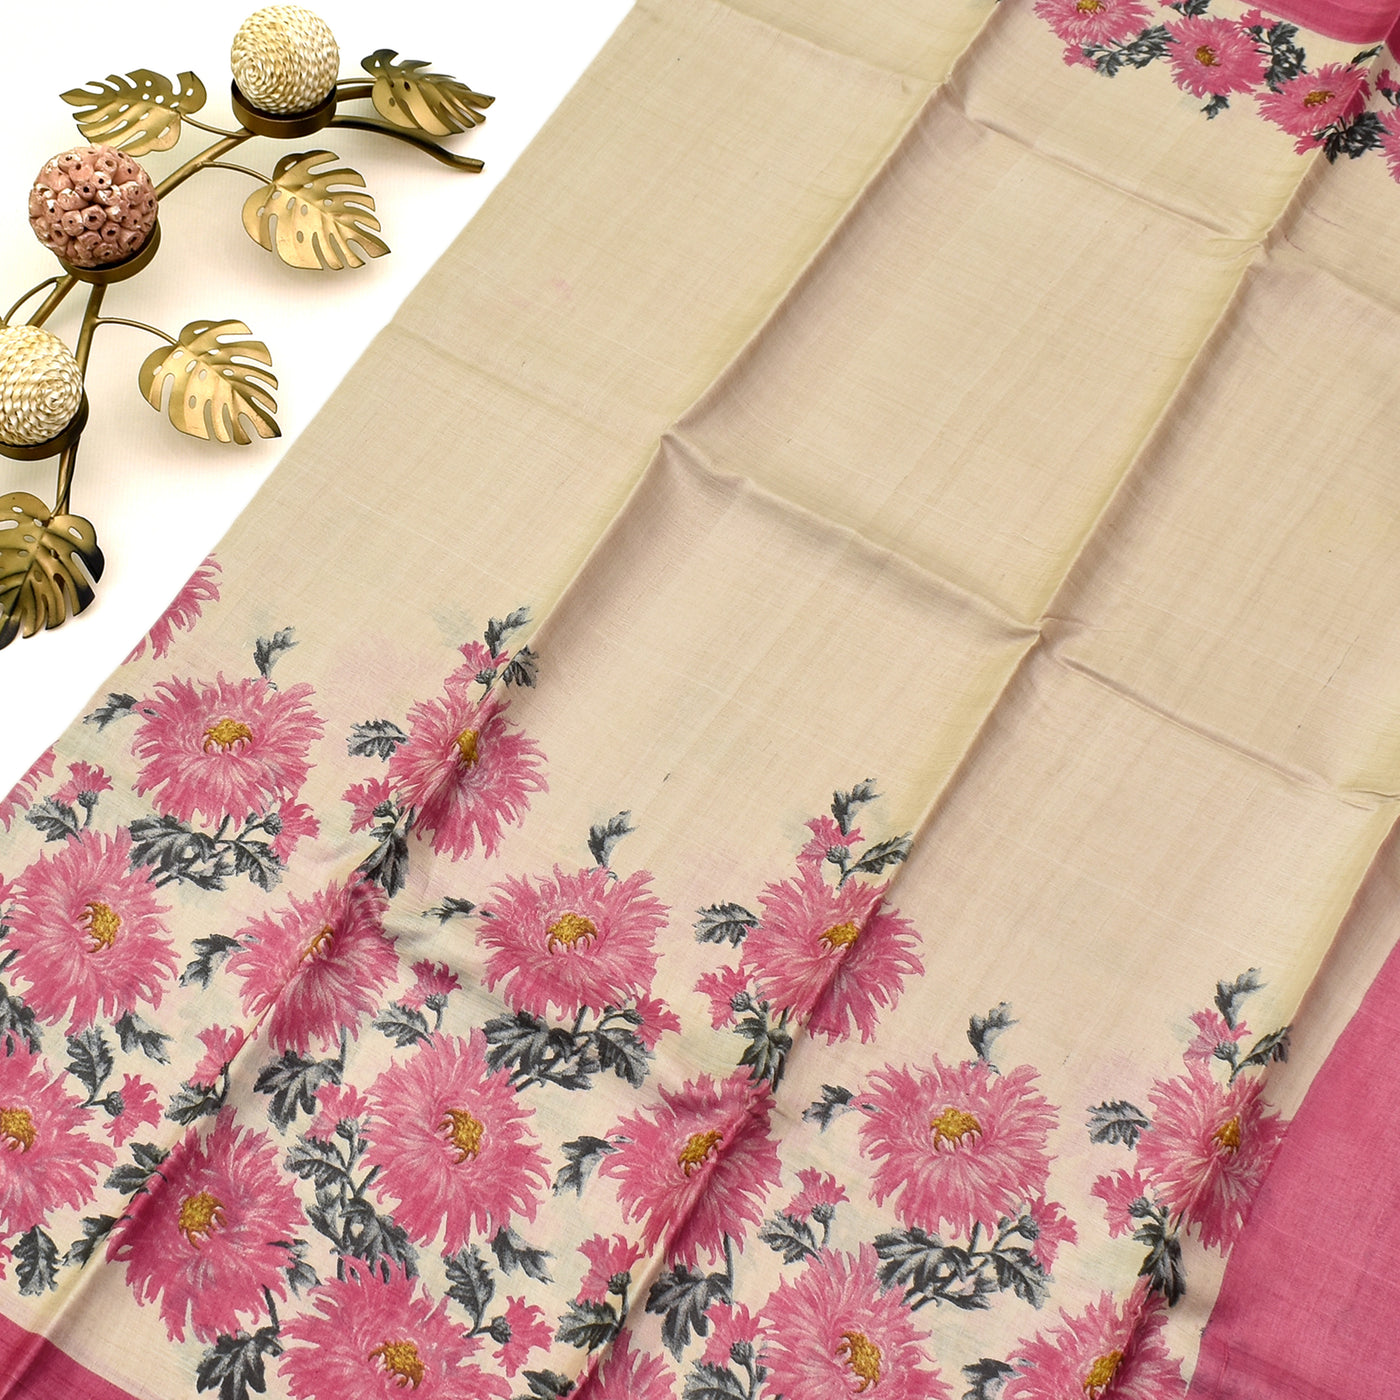 Off White Tussar Silk Saree with floral print design